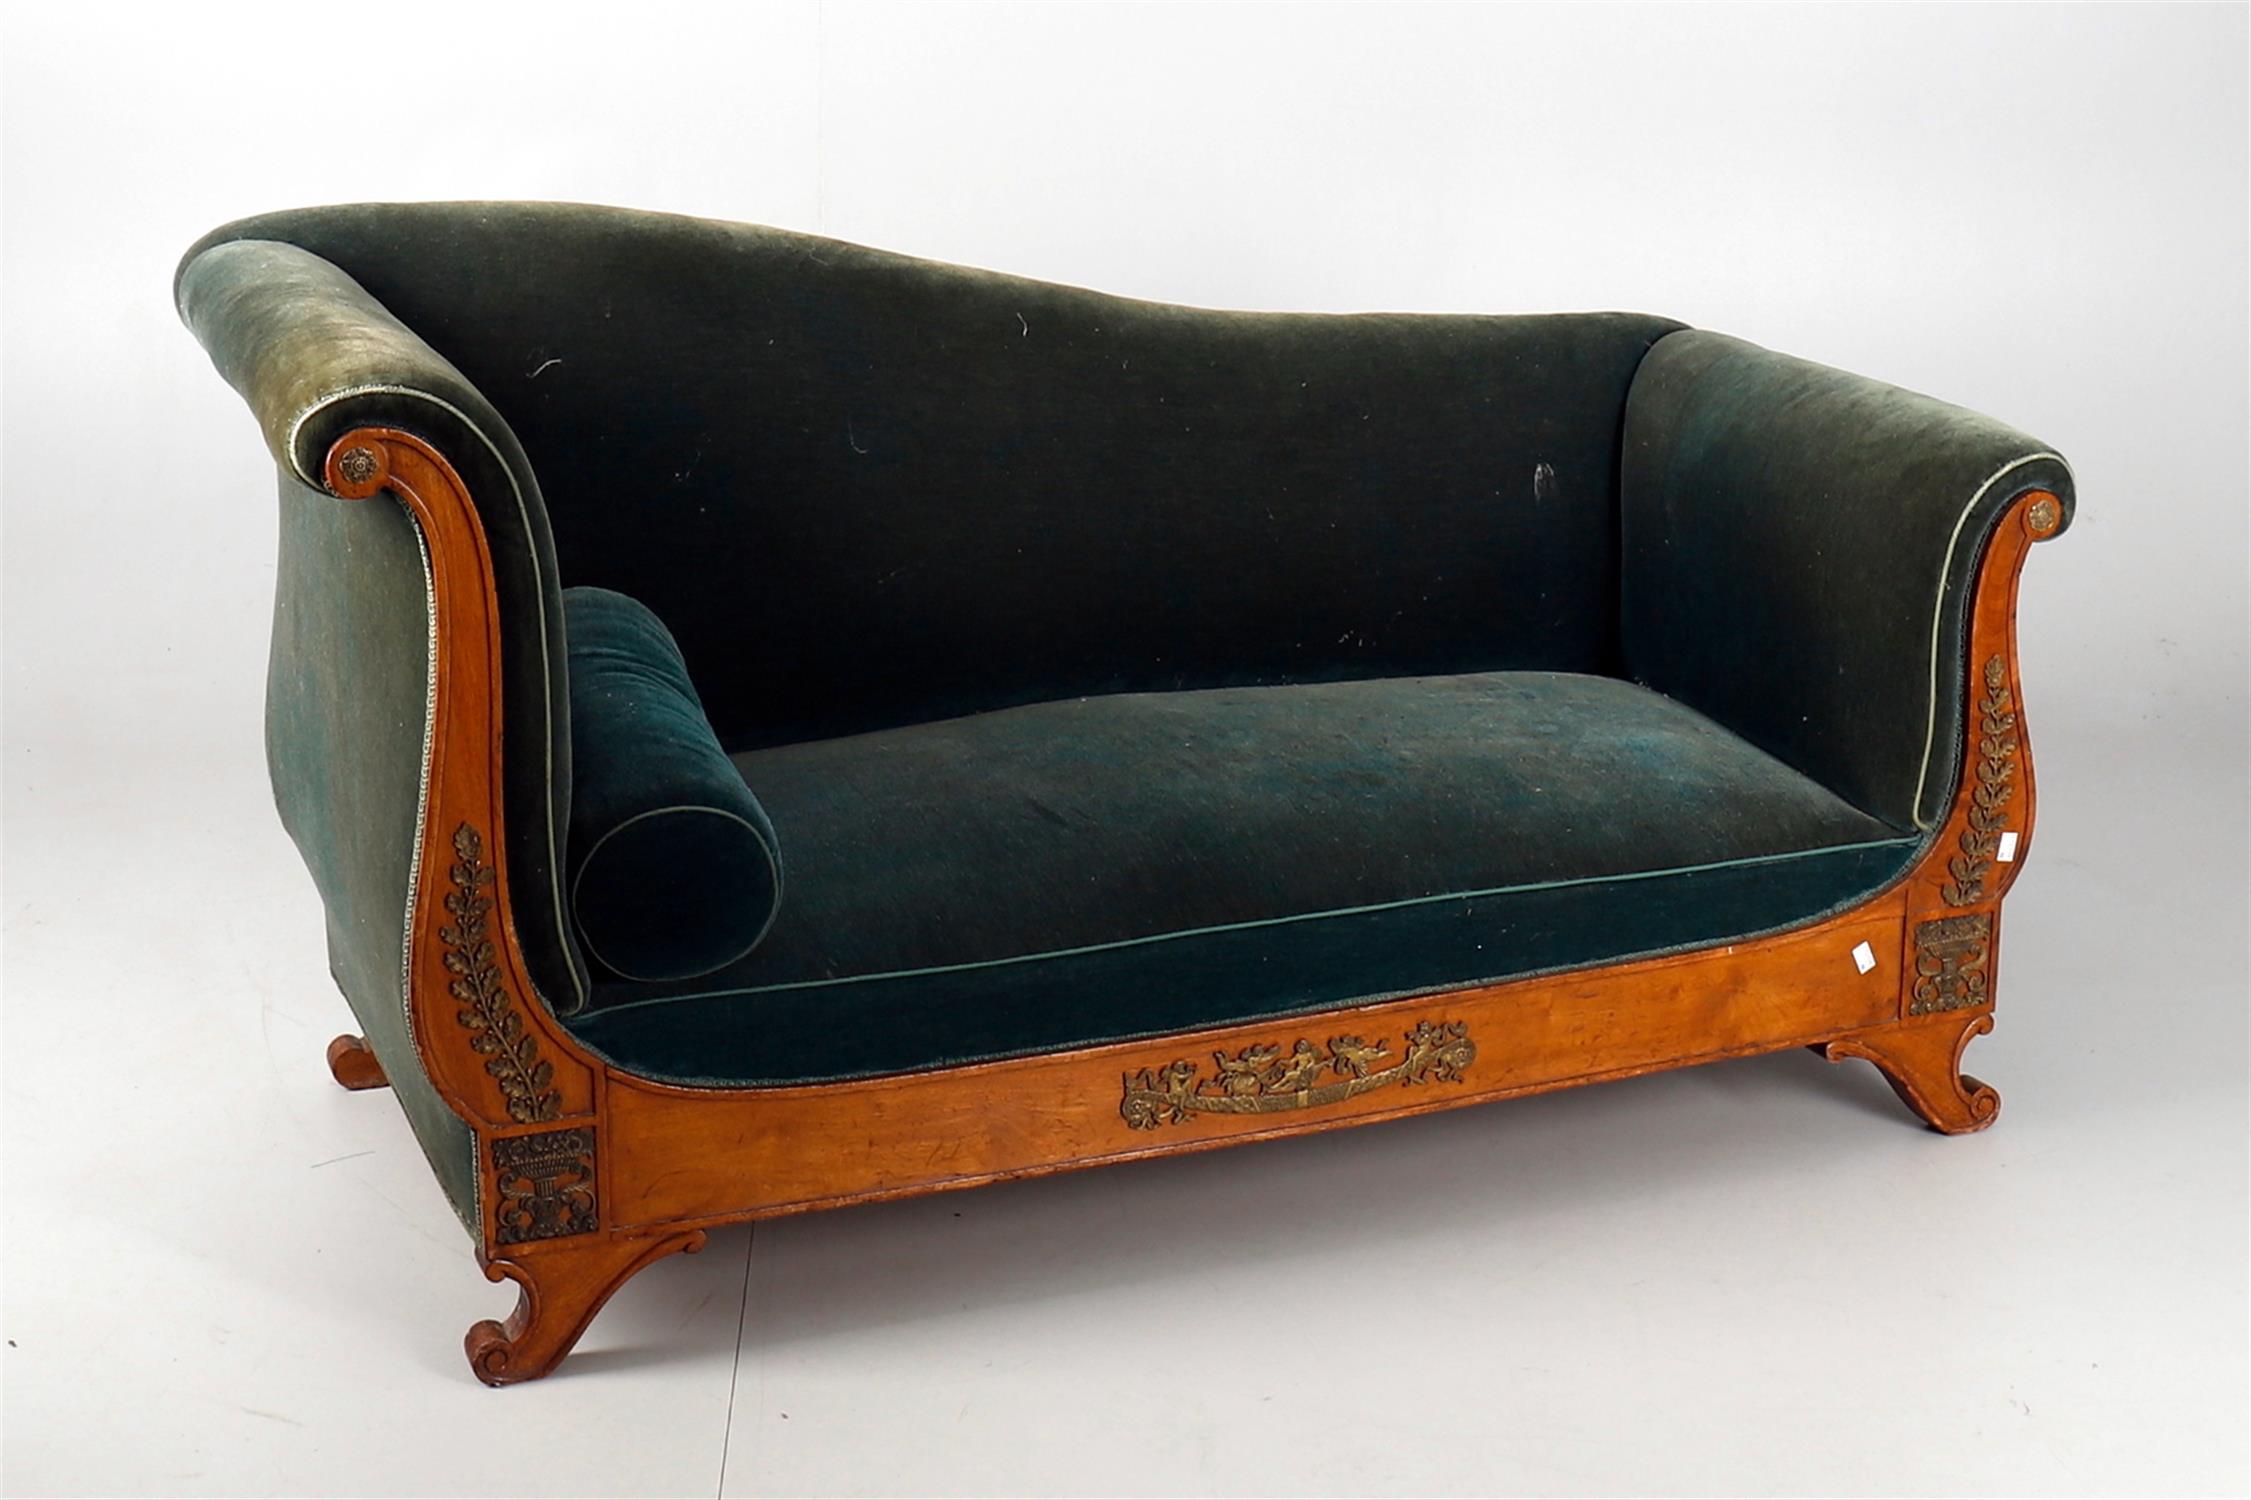 A French Empire style walnut and gilt metal mounted sofa